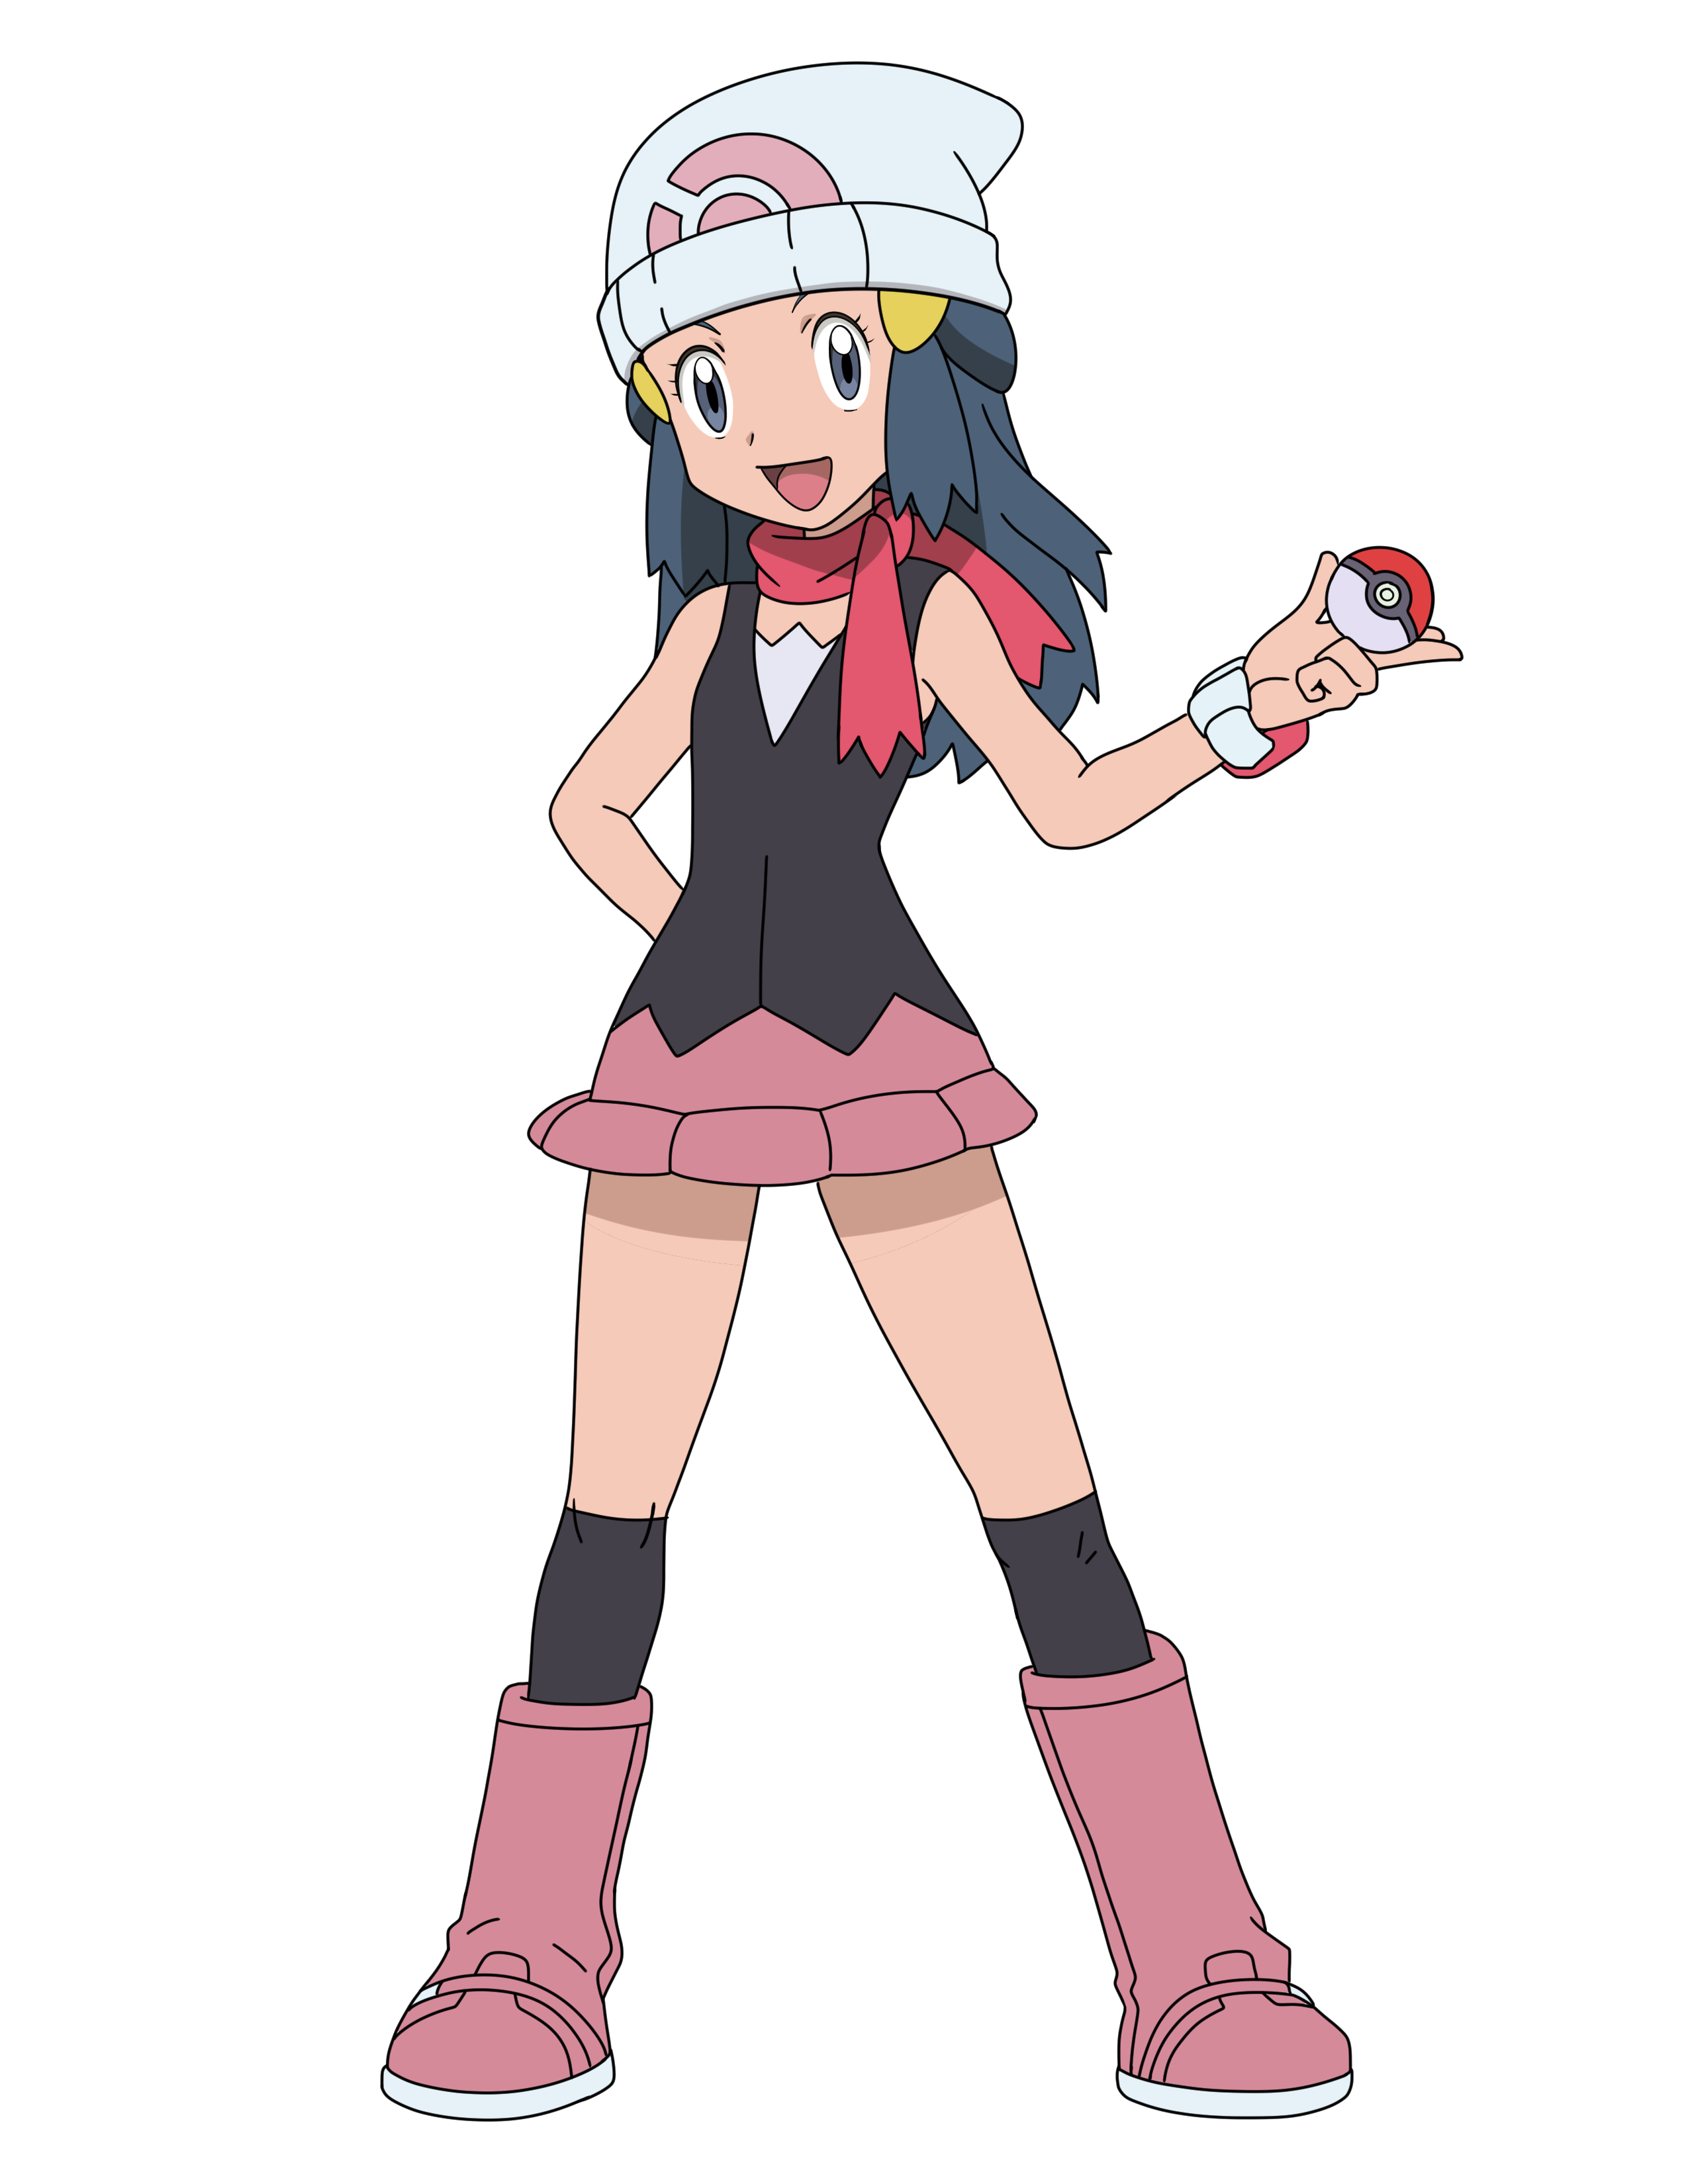 Devory on X: Dawn Pokemon Trainer is in the works!